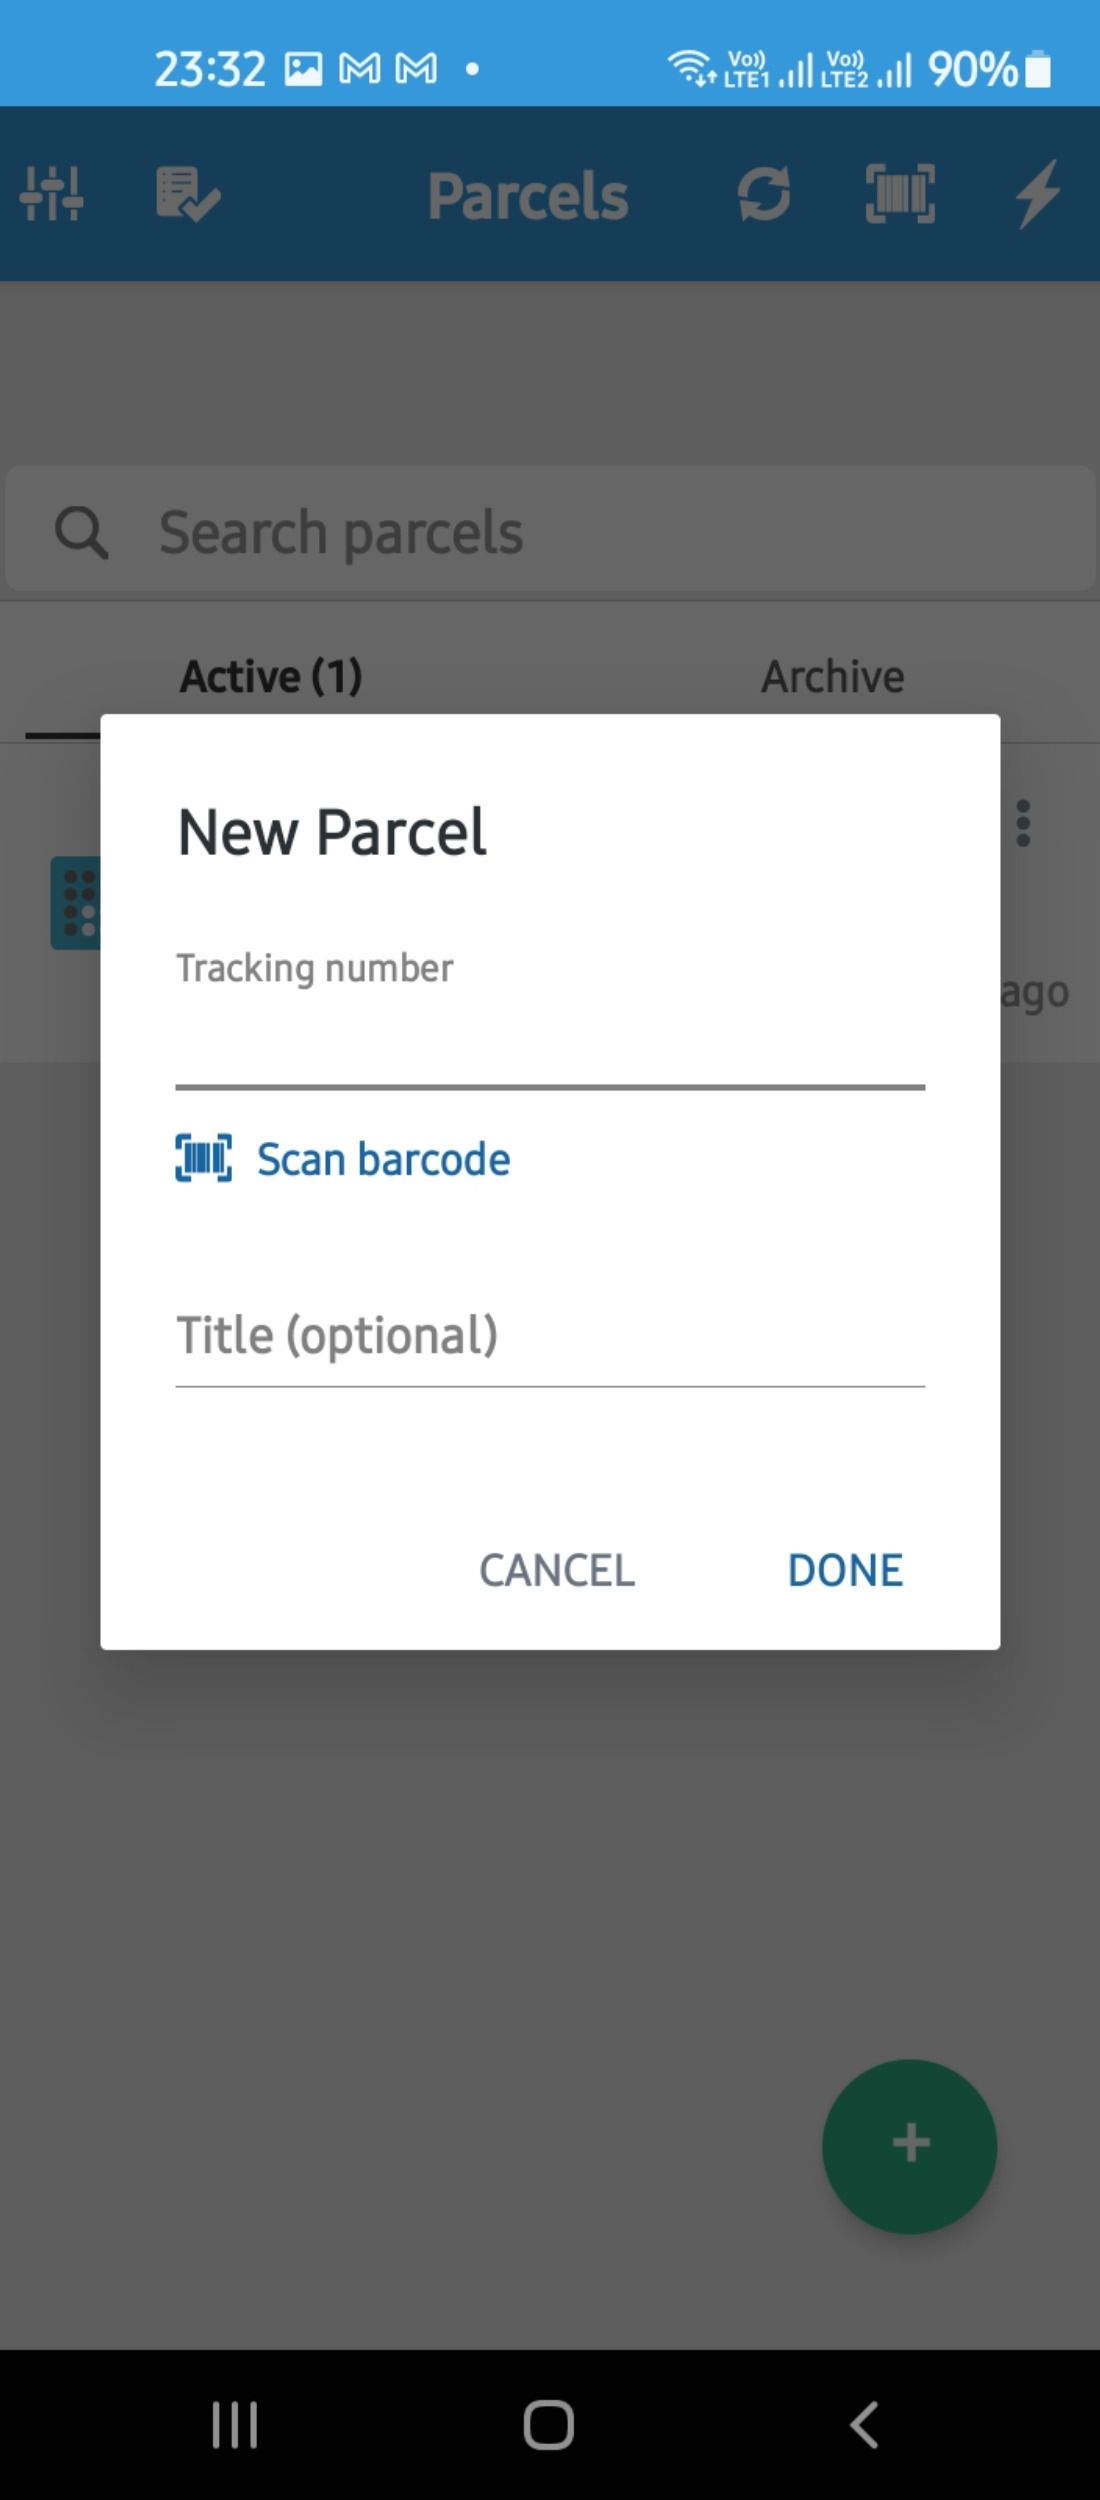 Automatic tracking number detection in Parcels